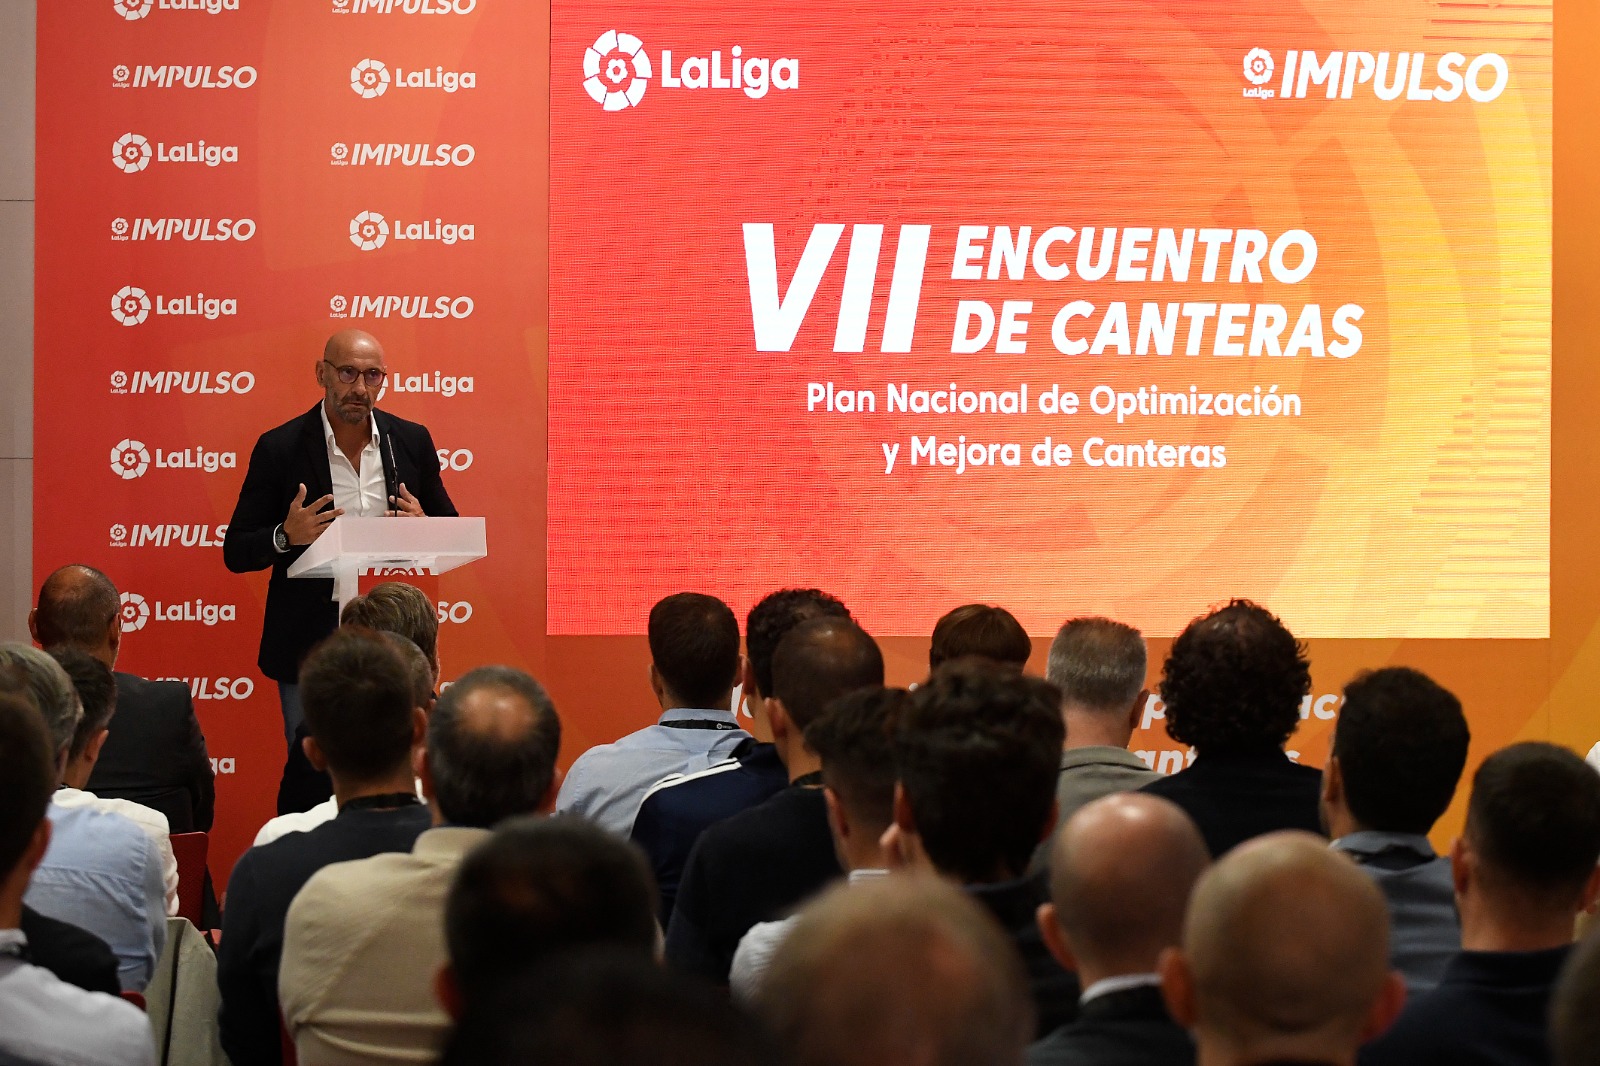 The youth academy meeting concludes with the presentation of the pioneering technological model of Sevilla FC.